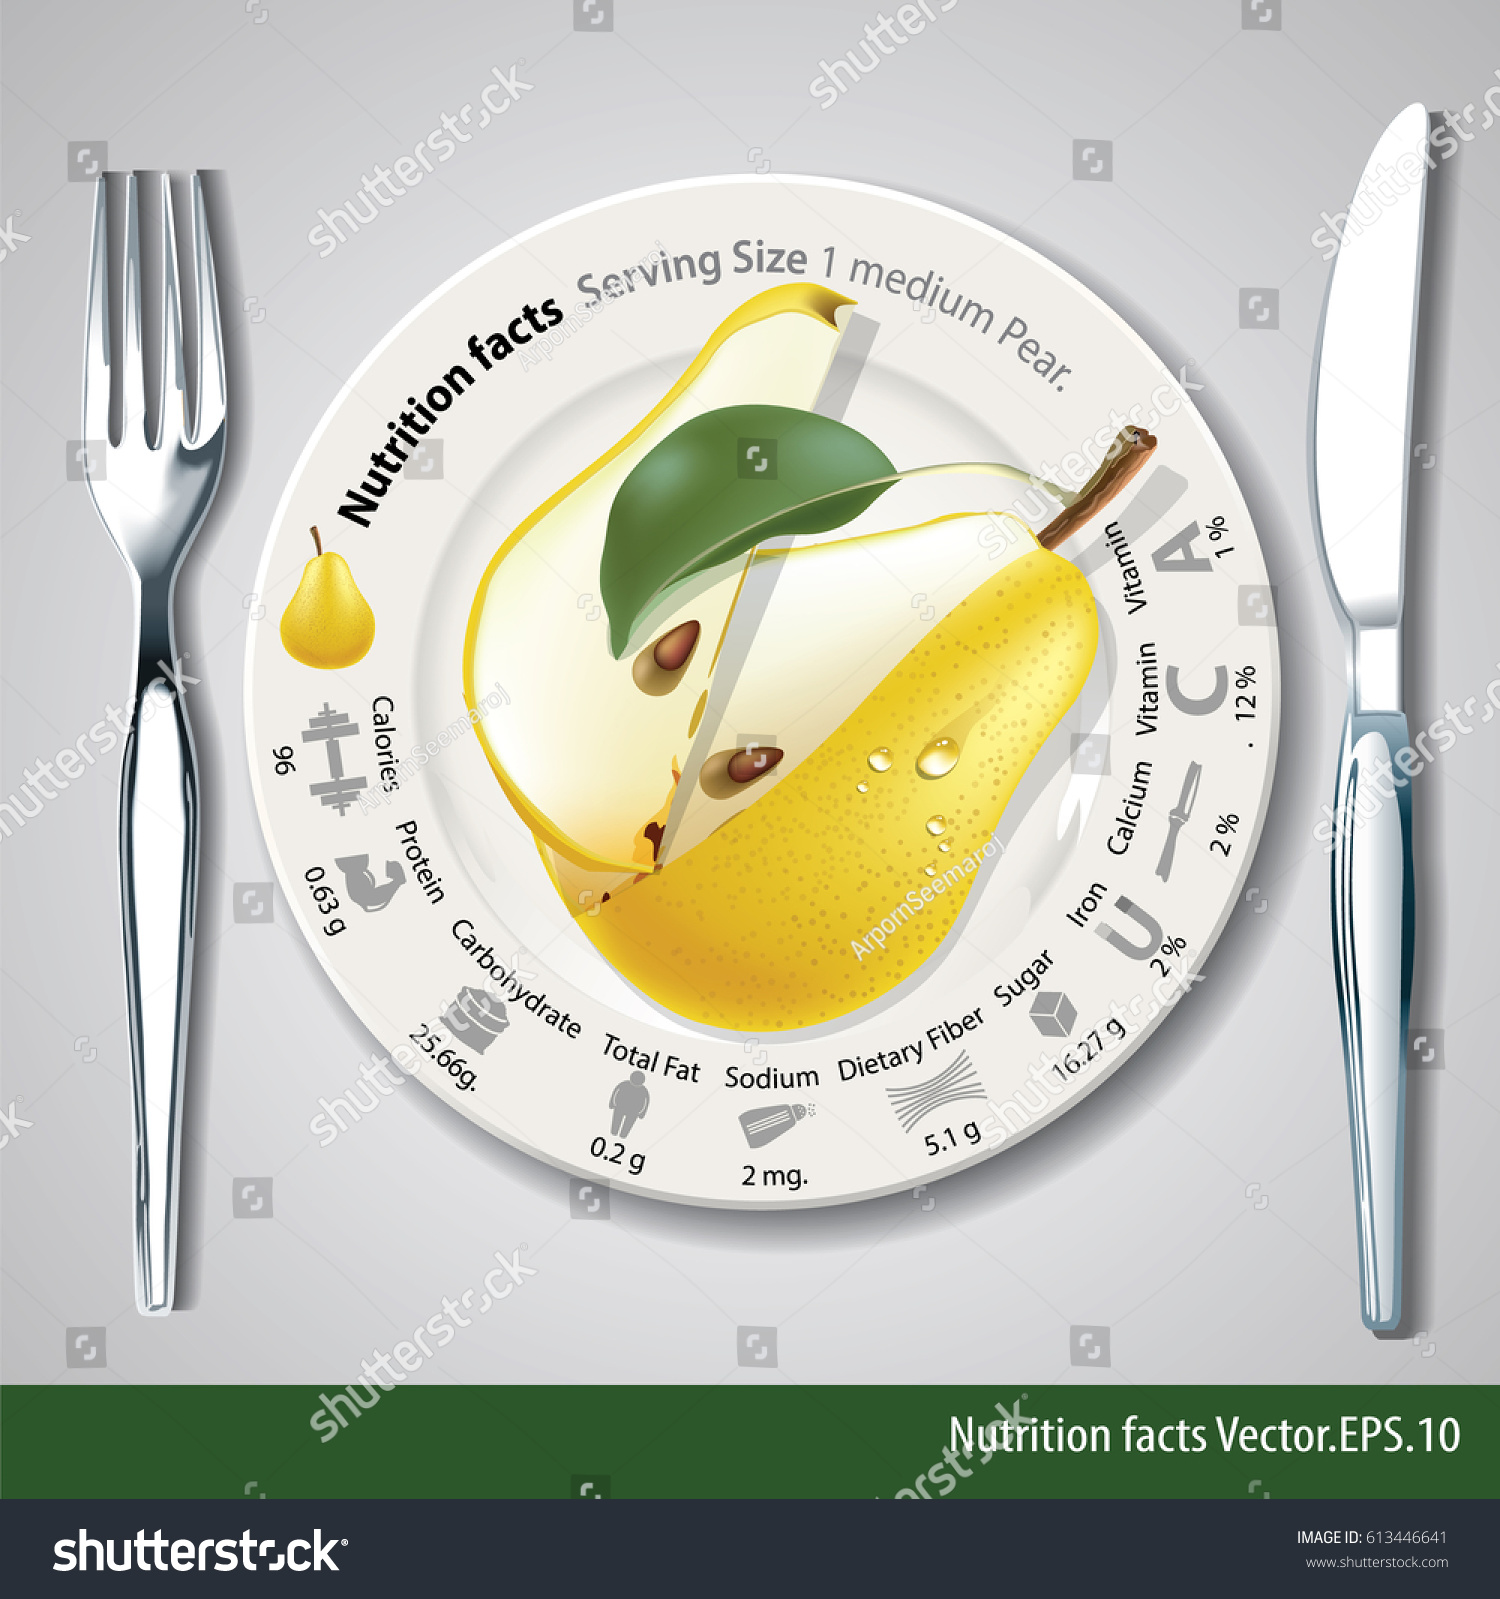 Vector Nutrition Facts One Medium Pear Stock Vector Royalty Free 613446641 Shutterstock 